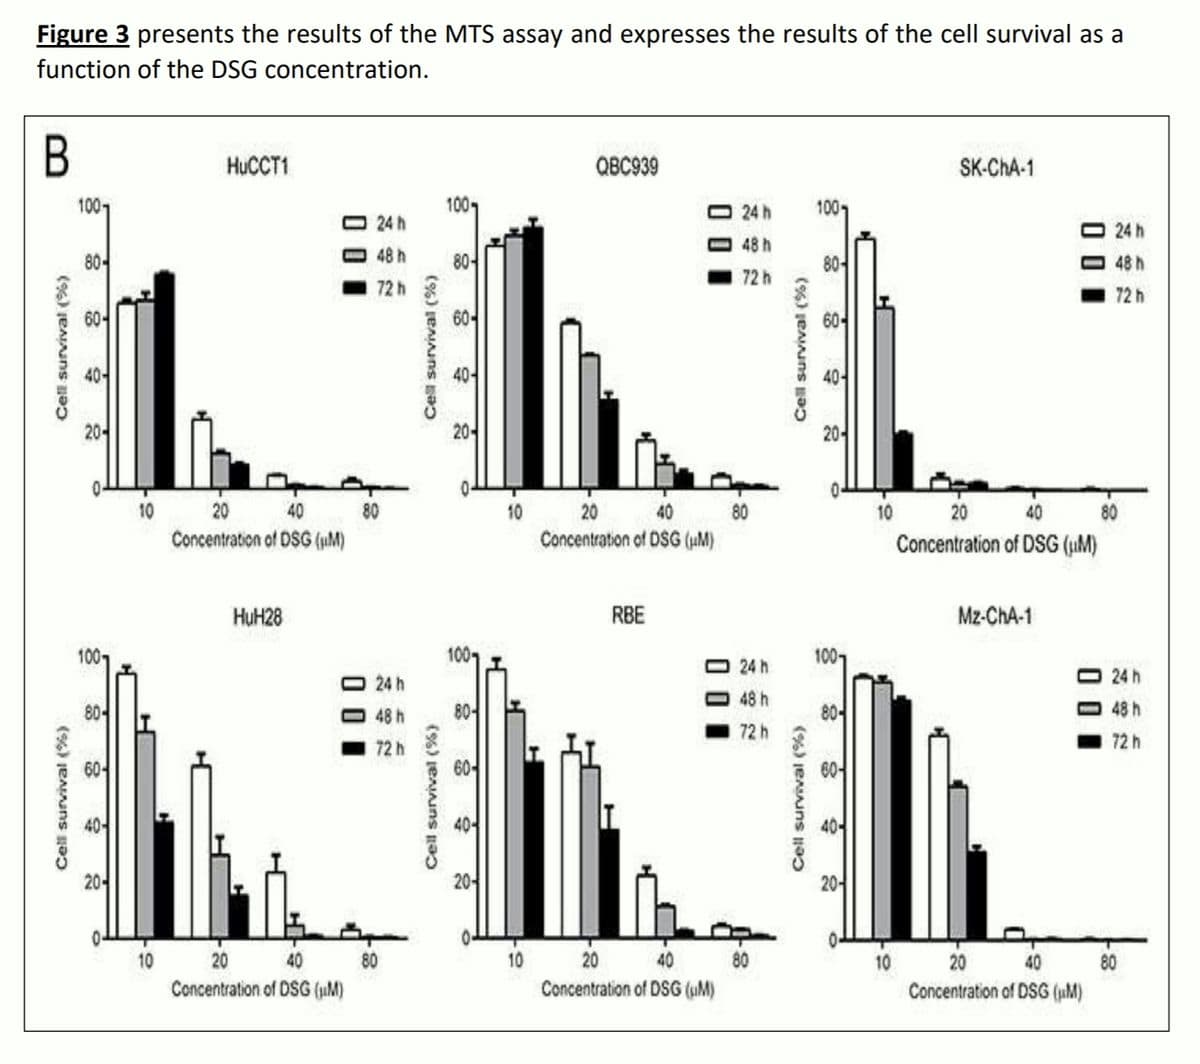 Figure 3 presents the results of the MTS assay and expresses the results of the cell survival as a
function of the DSG concentration.
HUCCT1
QBC939
SK-ChA-1
100
100-
24 h
100
24 h
24 h
48 h
80-
48 h
80-
80-
48 h
72 h
72 h
72 h
60-
60-
60-
40-
40-
40-
20-
20-
20-
0-
10
20
40
10
20
40
80
10
20
40
80
80
Concentration of DSG (uM)
Concentration of DSG (uM)
Concentration of DSG (uM)
HUH28
RBE
Mz-ChA-1
100,
100-
24 h
100
O 24 h
O 24 h
48 h
80-
O 48 h
80-
80-
48 h
72 h
72 h
72 h
60-
60-
40-
40-
40-
20
20-
20-
10
20
40
80
10
20
40
10
20
40
80
Concentration of DSG (uM)
Concentration of DSG (uM)
Concentration of DSG (uM)
Cell survival (%)
Cel survival (%)
001
Cel survival (9%)
Cell survival (%)
0 01
0 01
Cell survival (%)
Cel survival (%)
0 01
O 01
